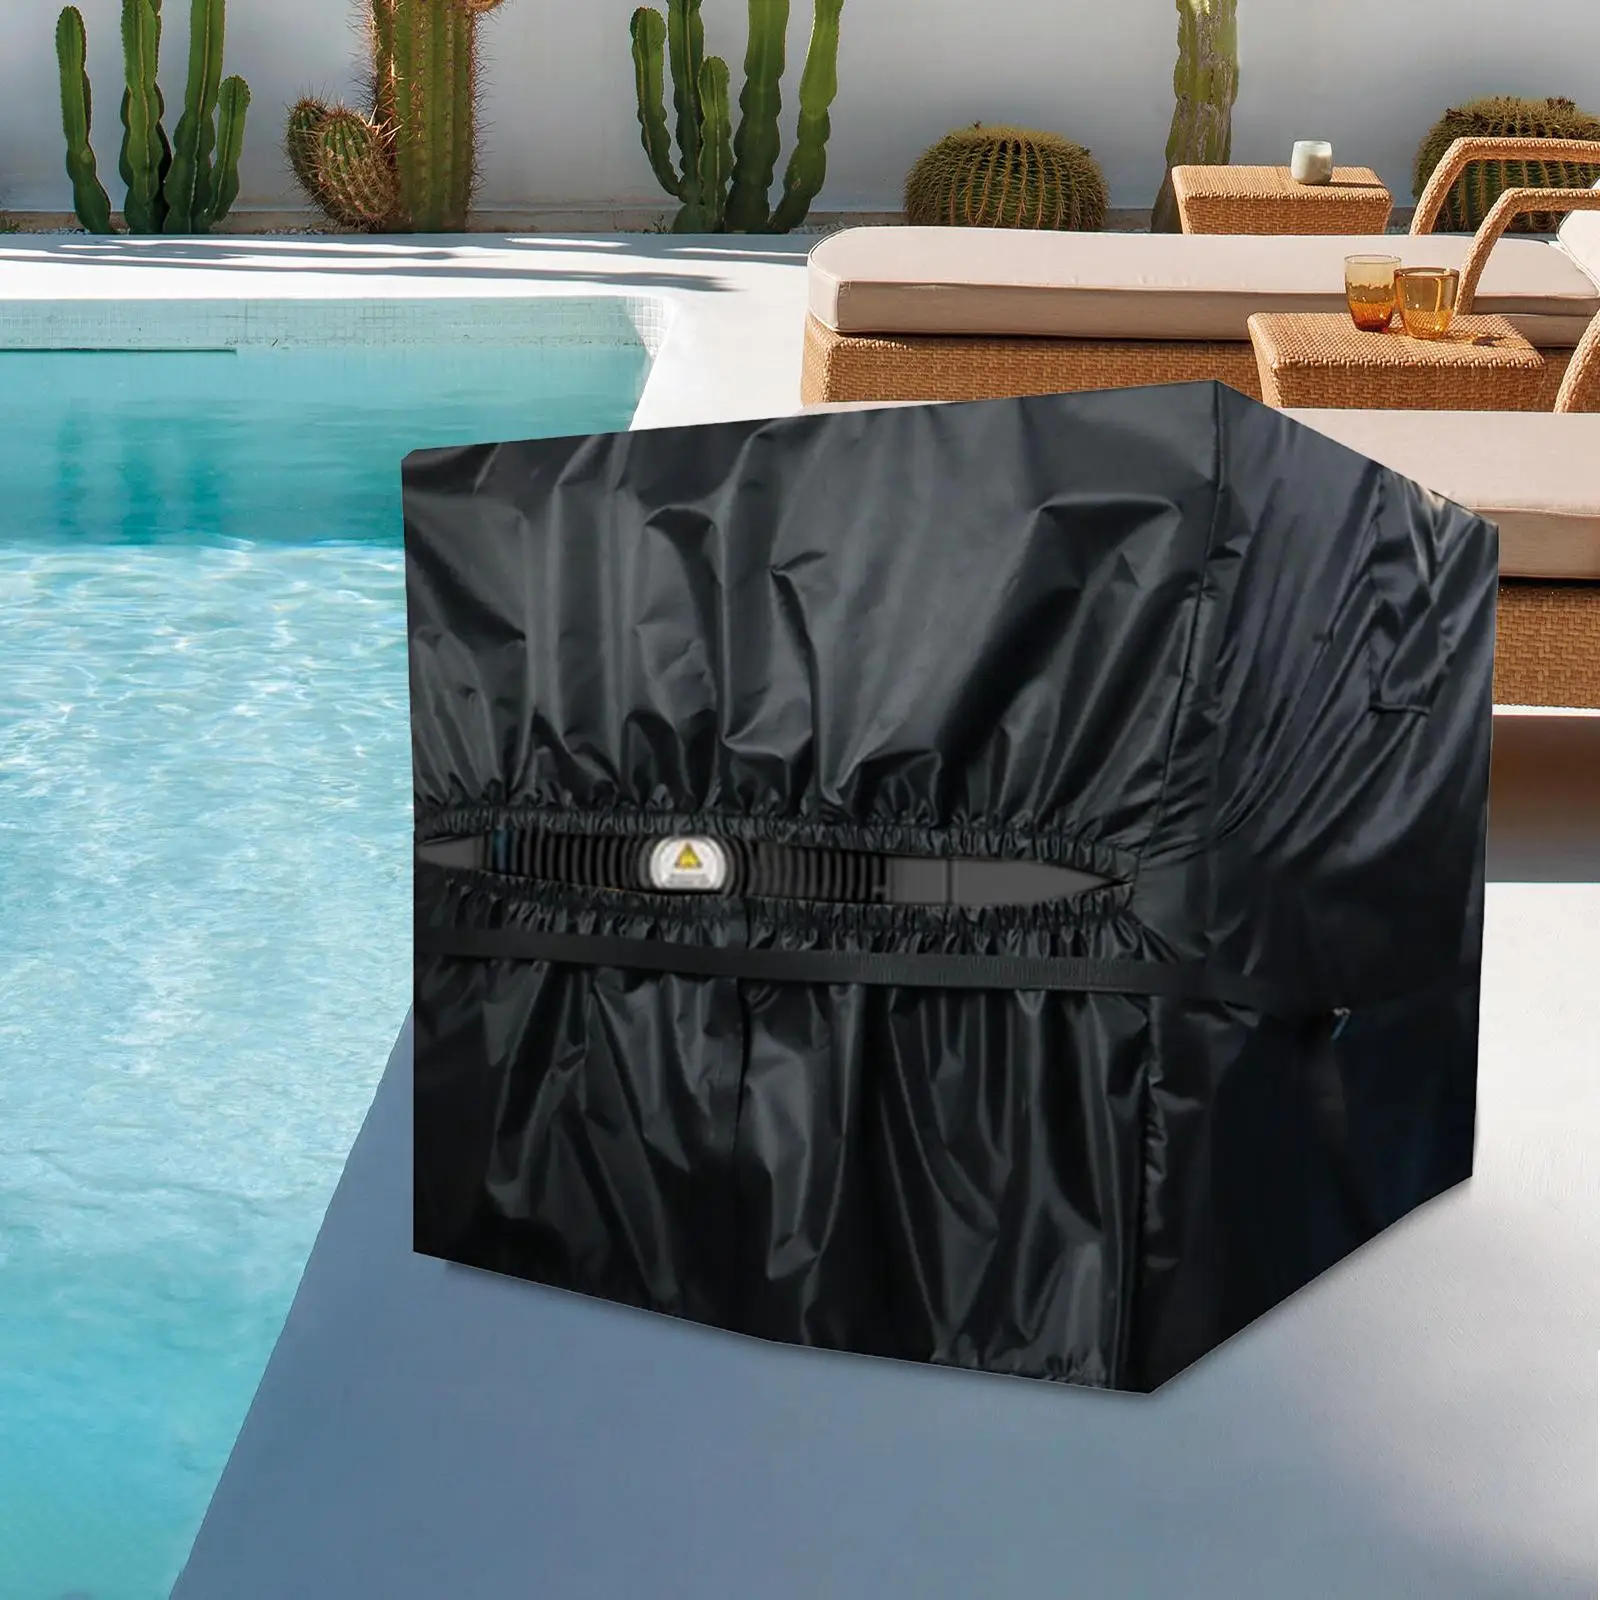 Pool Heater Cover Square Pool Equipment Cover Multifunction Elastic Bottom Drawstring Swimming Pool Heat Pumps Cover for Outdoor